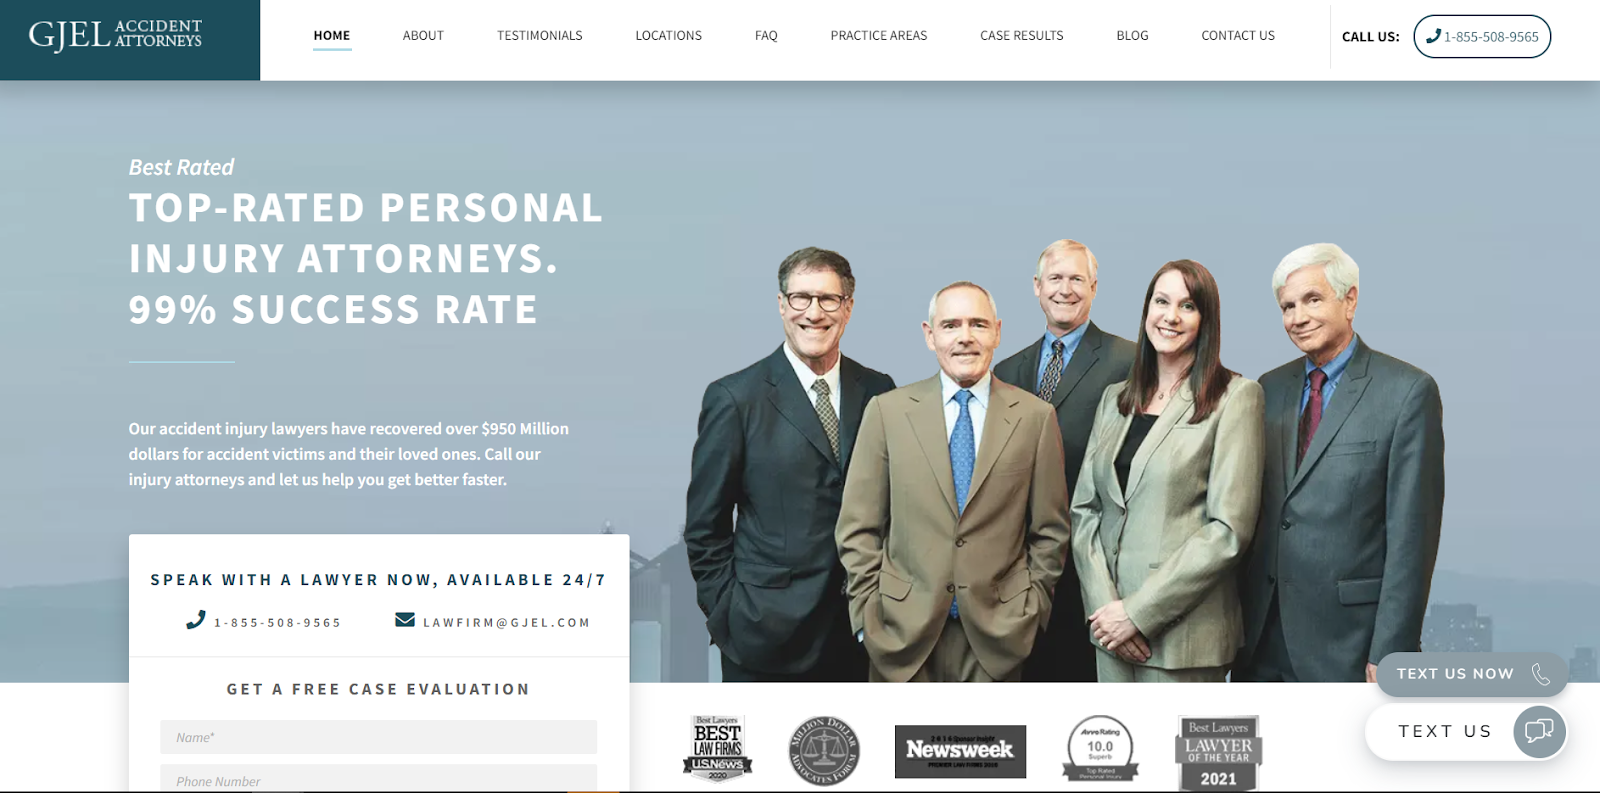 A personal injury attorney website